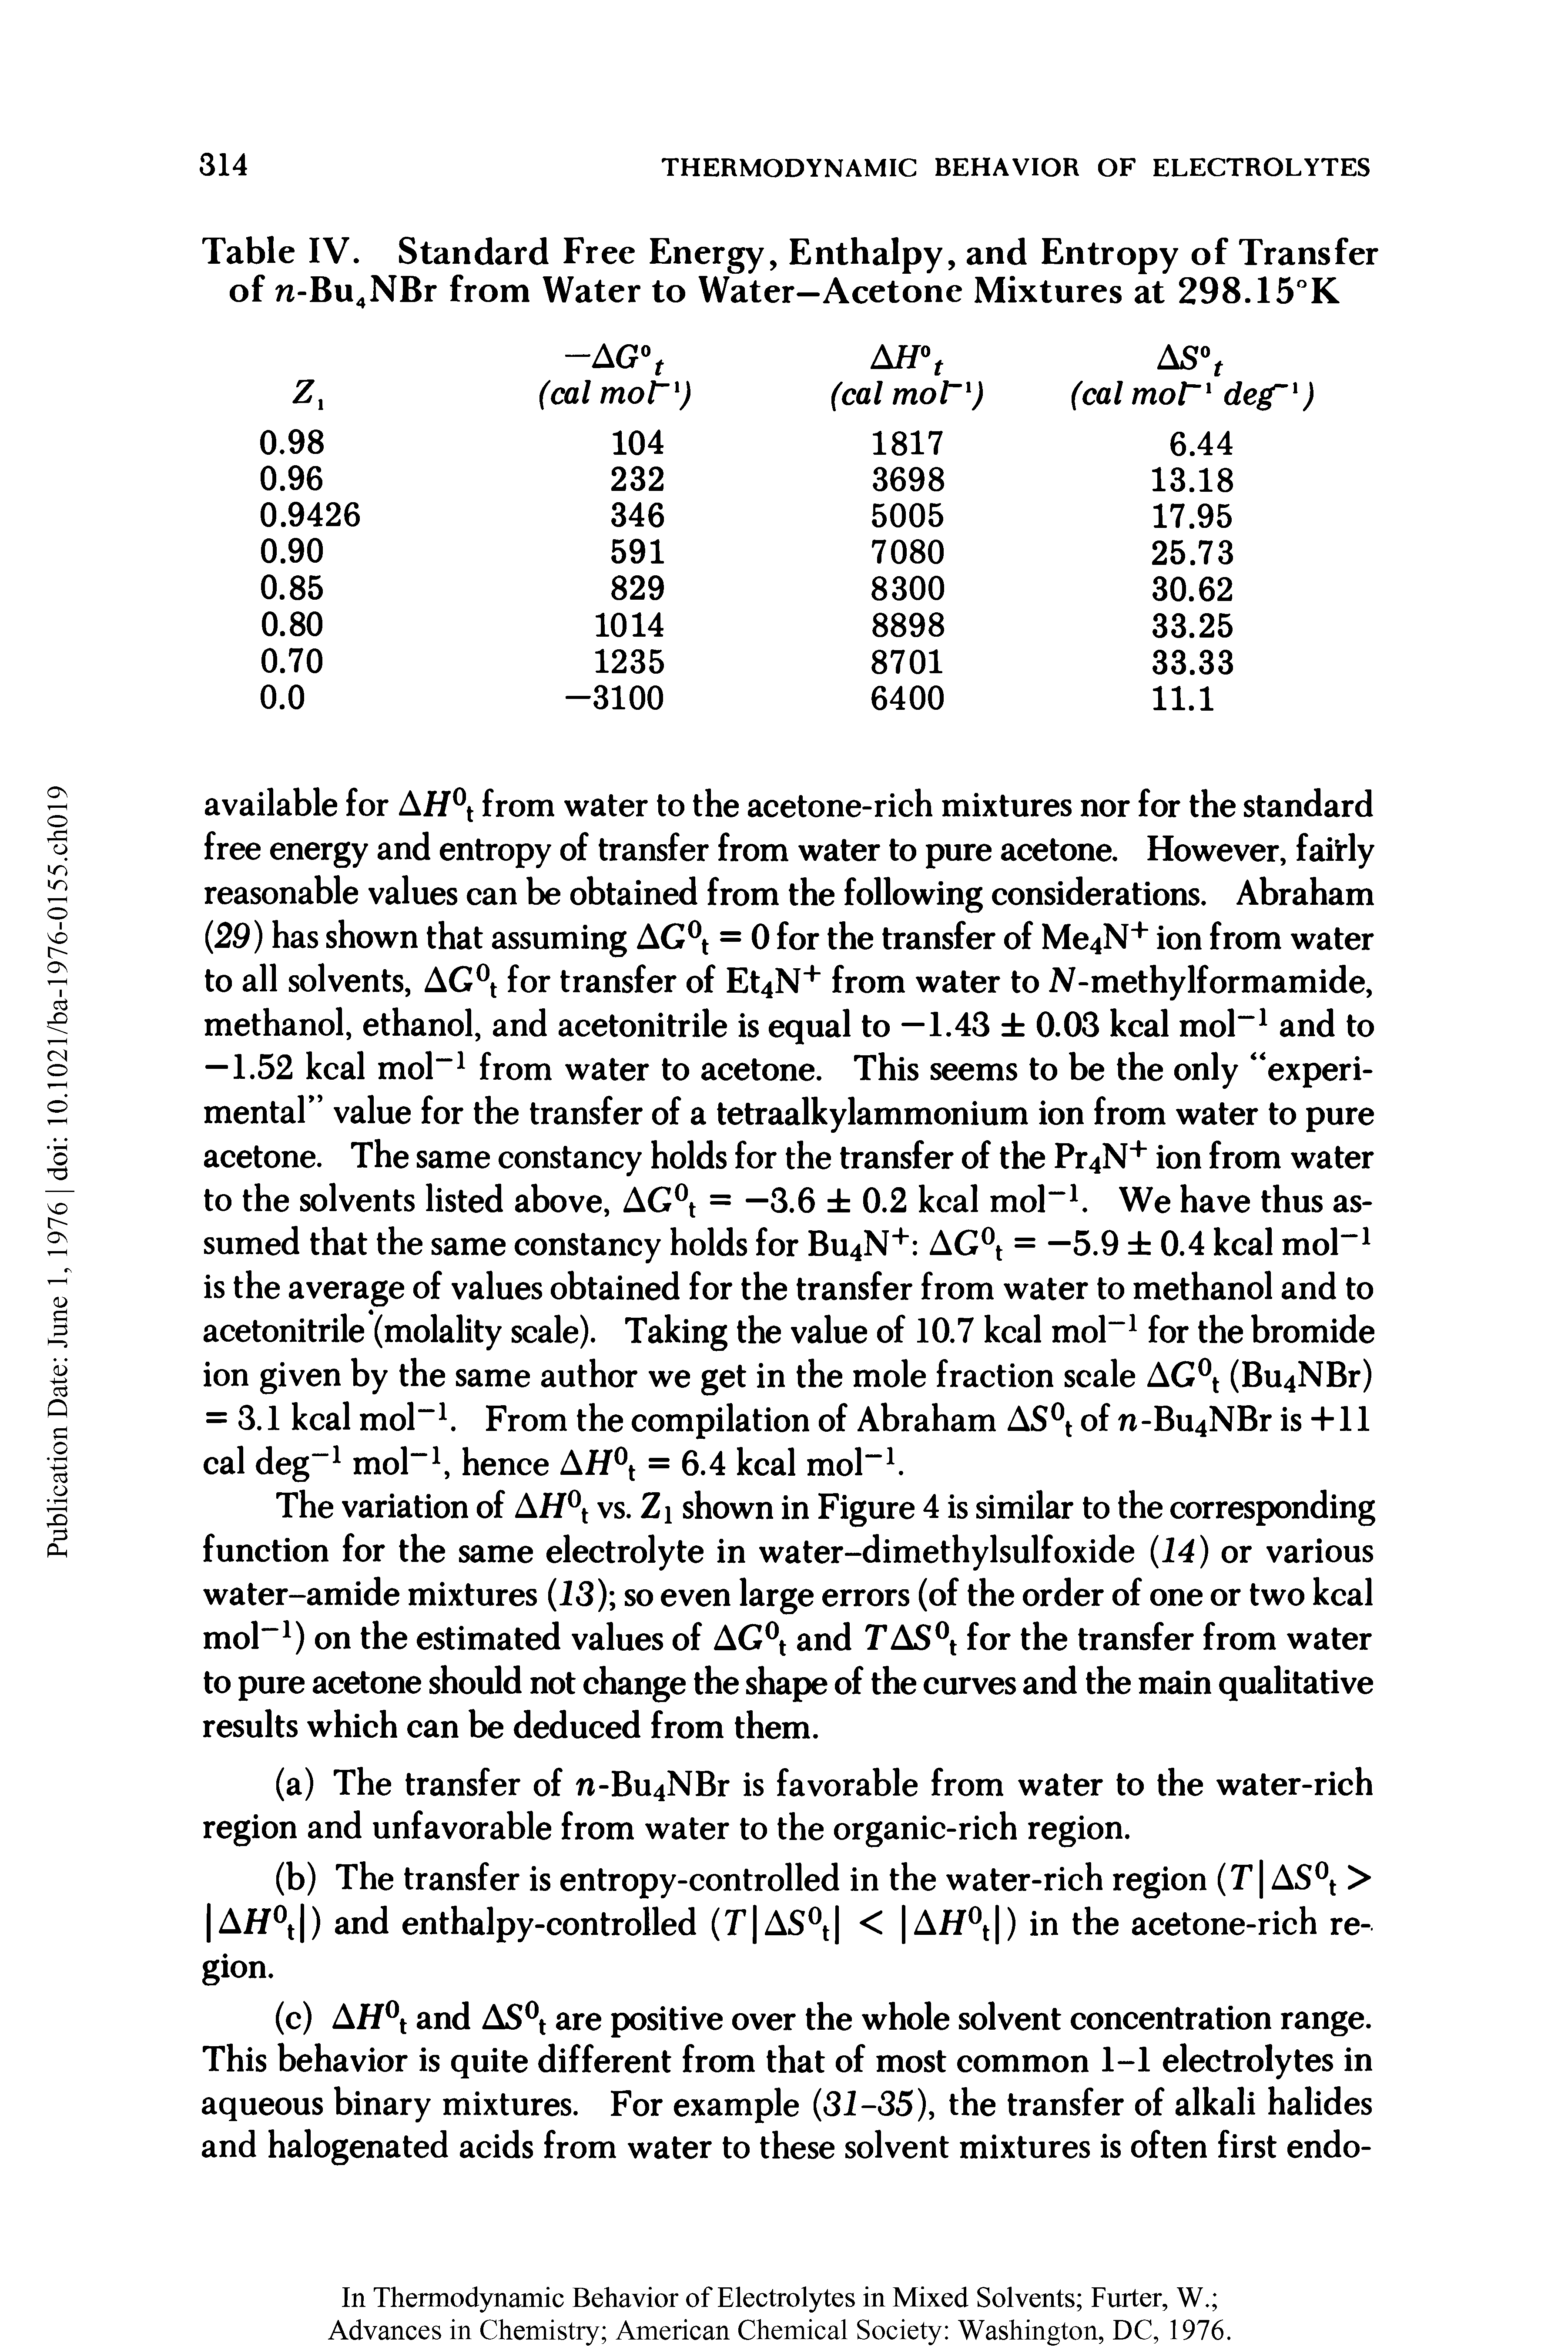 Table IV. Standard Free Energy, Enthalpy, and Entropy of Transfer of n-Bu4NBr from Water to Water—Acetone Mixtures at 298.15°K...